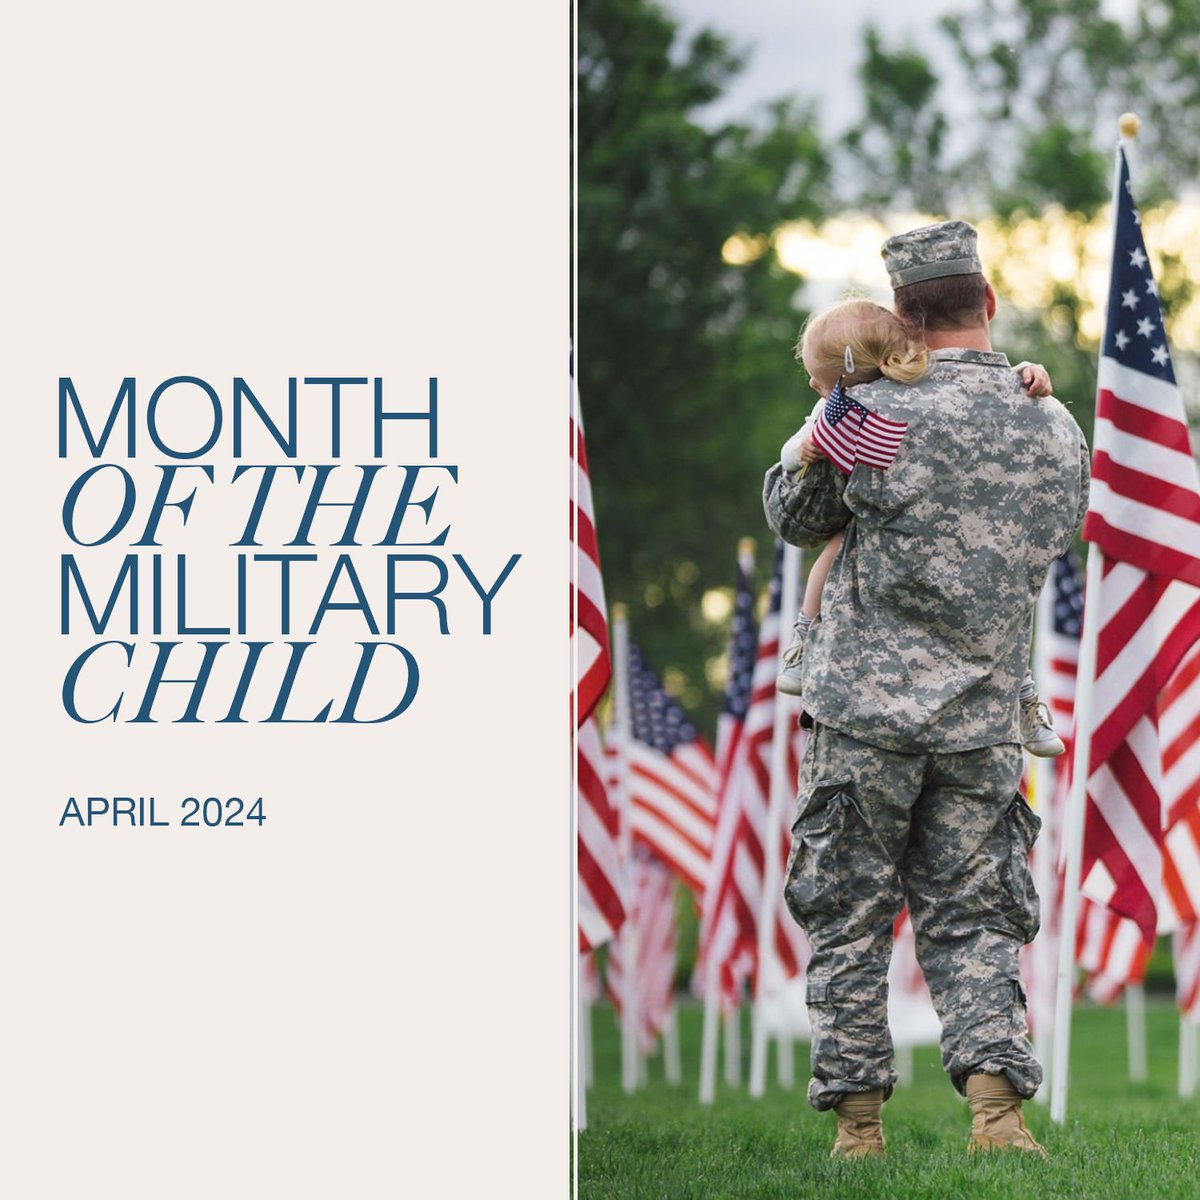 Our nation has more than 1.6 million military children & during the #MonthoftheMilitaryChild, we celebrate all of them. Children in military families face many challenges, like frequent moves, new homes, and new schools. They deserve our support & gratitude for their sacrifice.